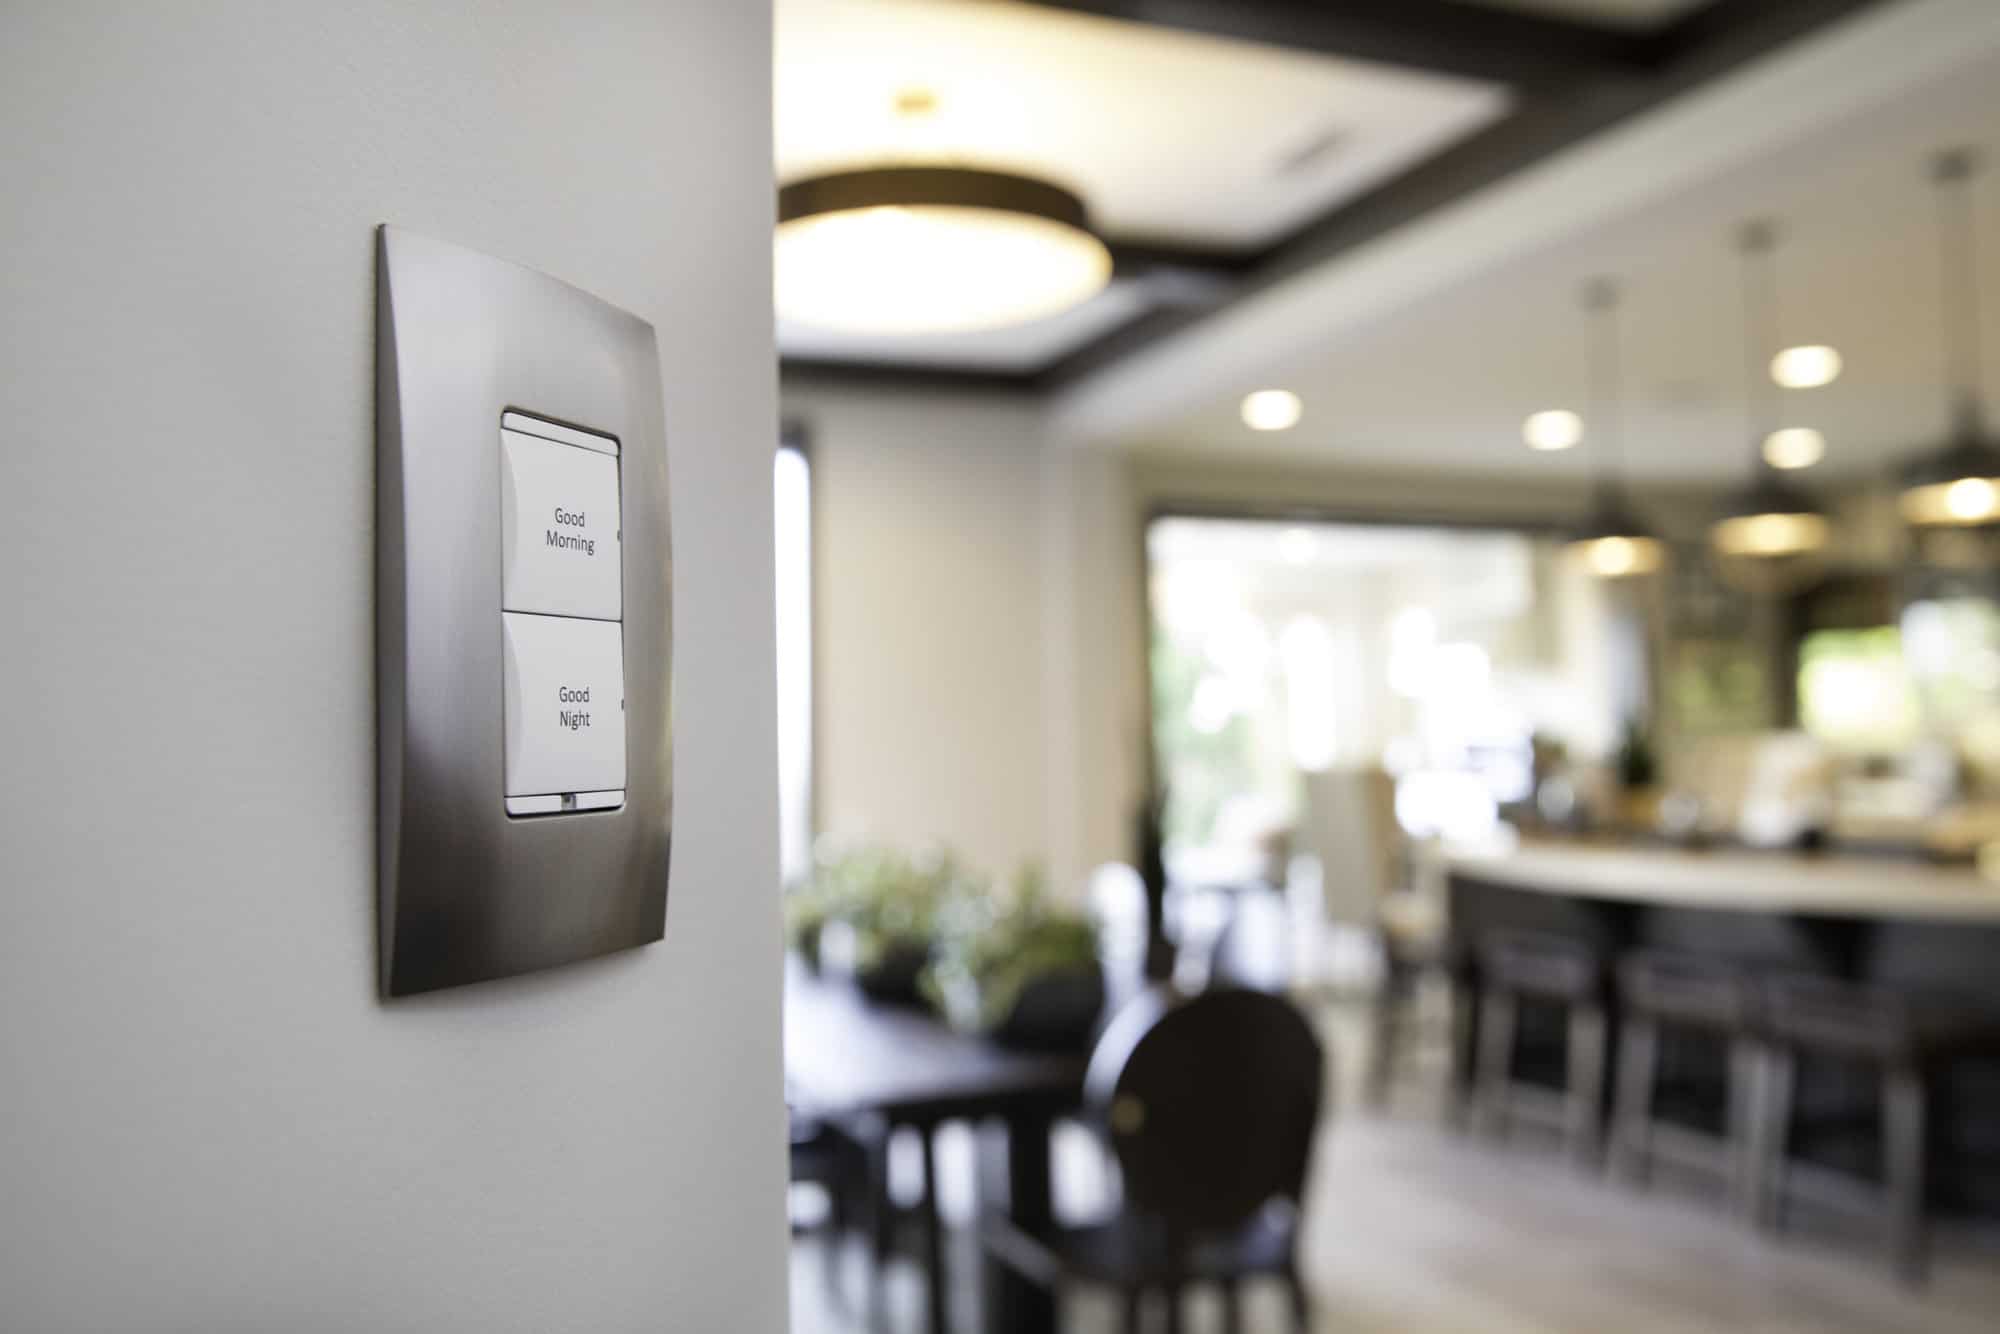 Lighting control systems and home automation